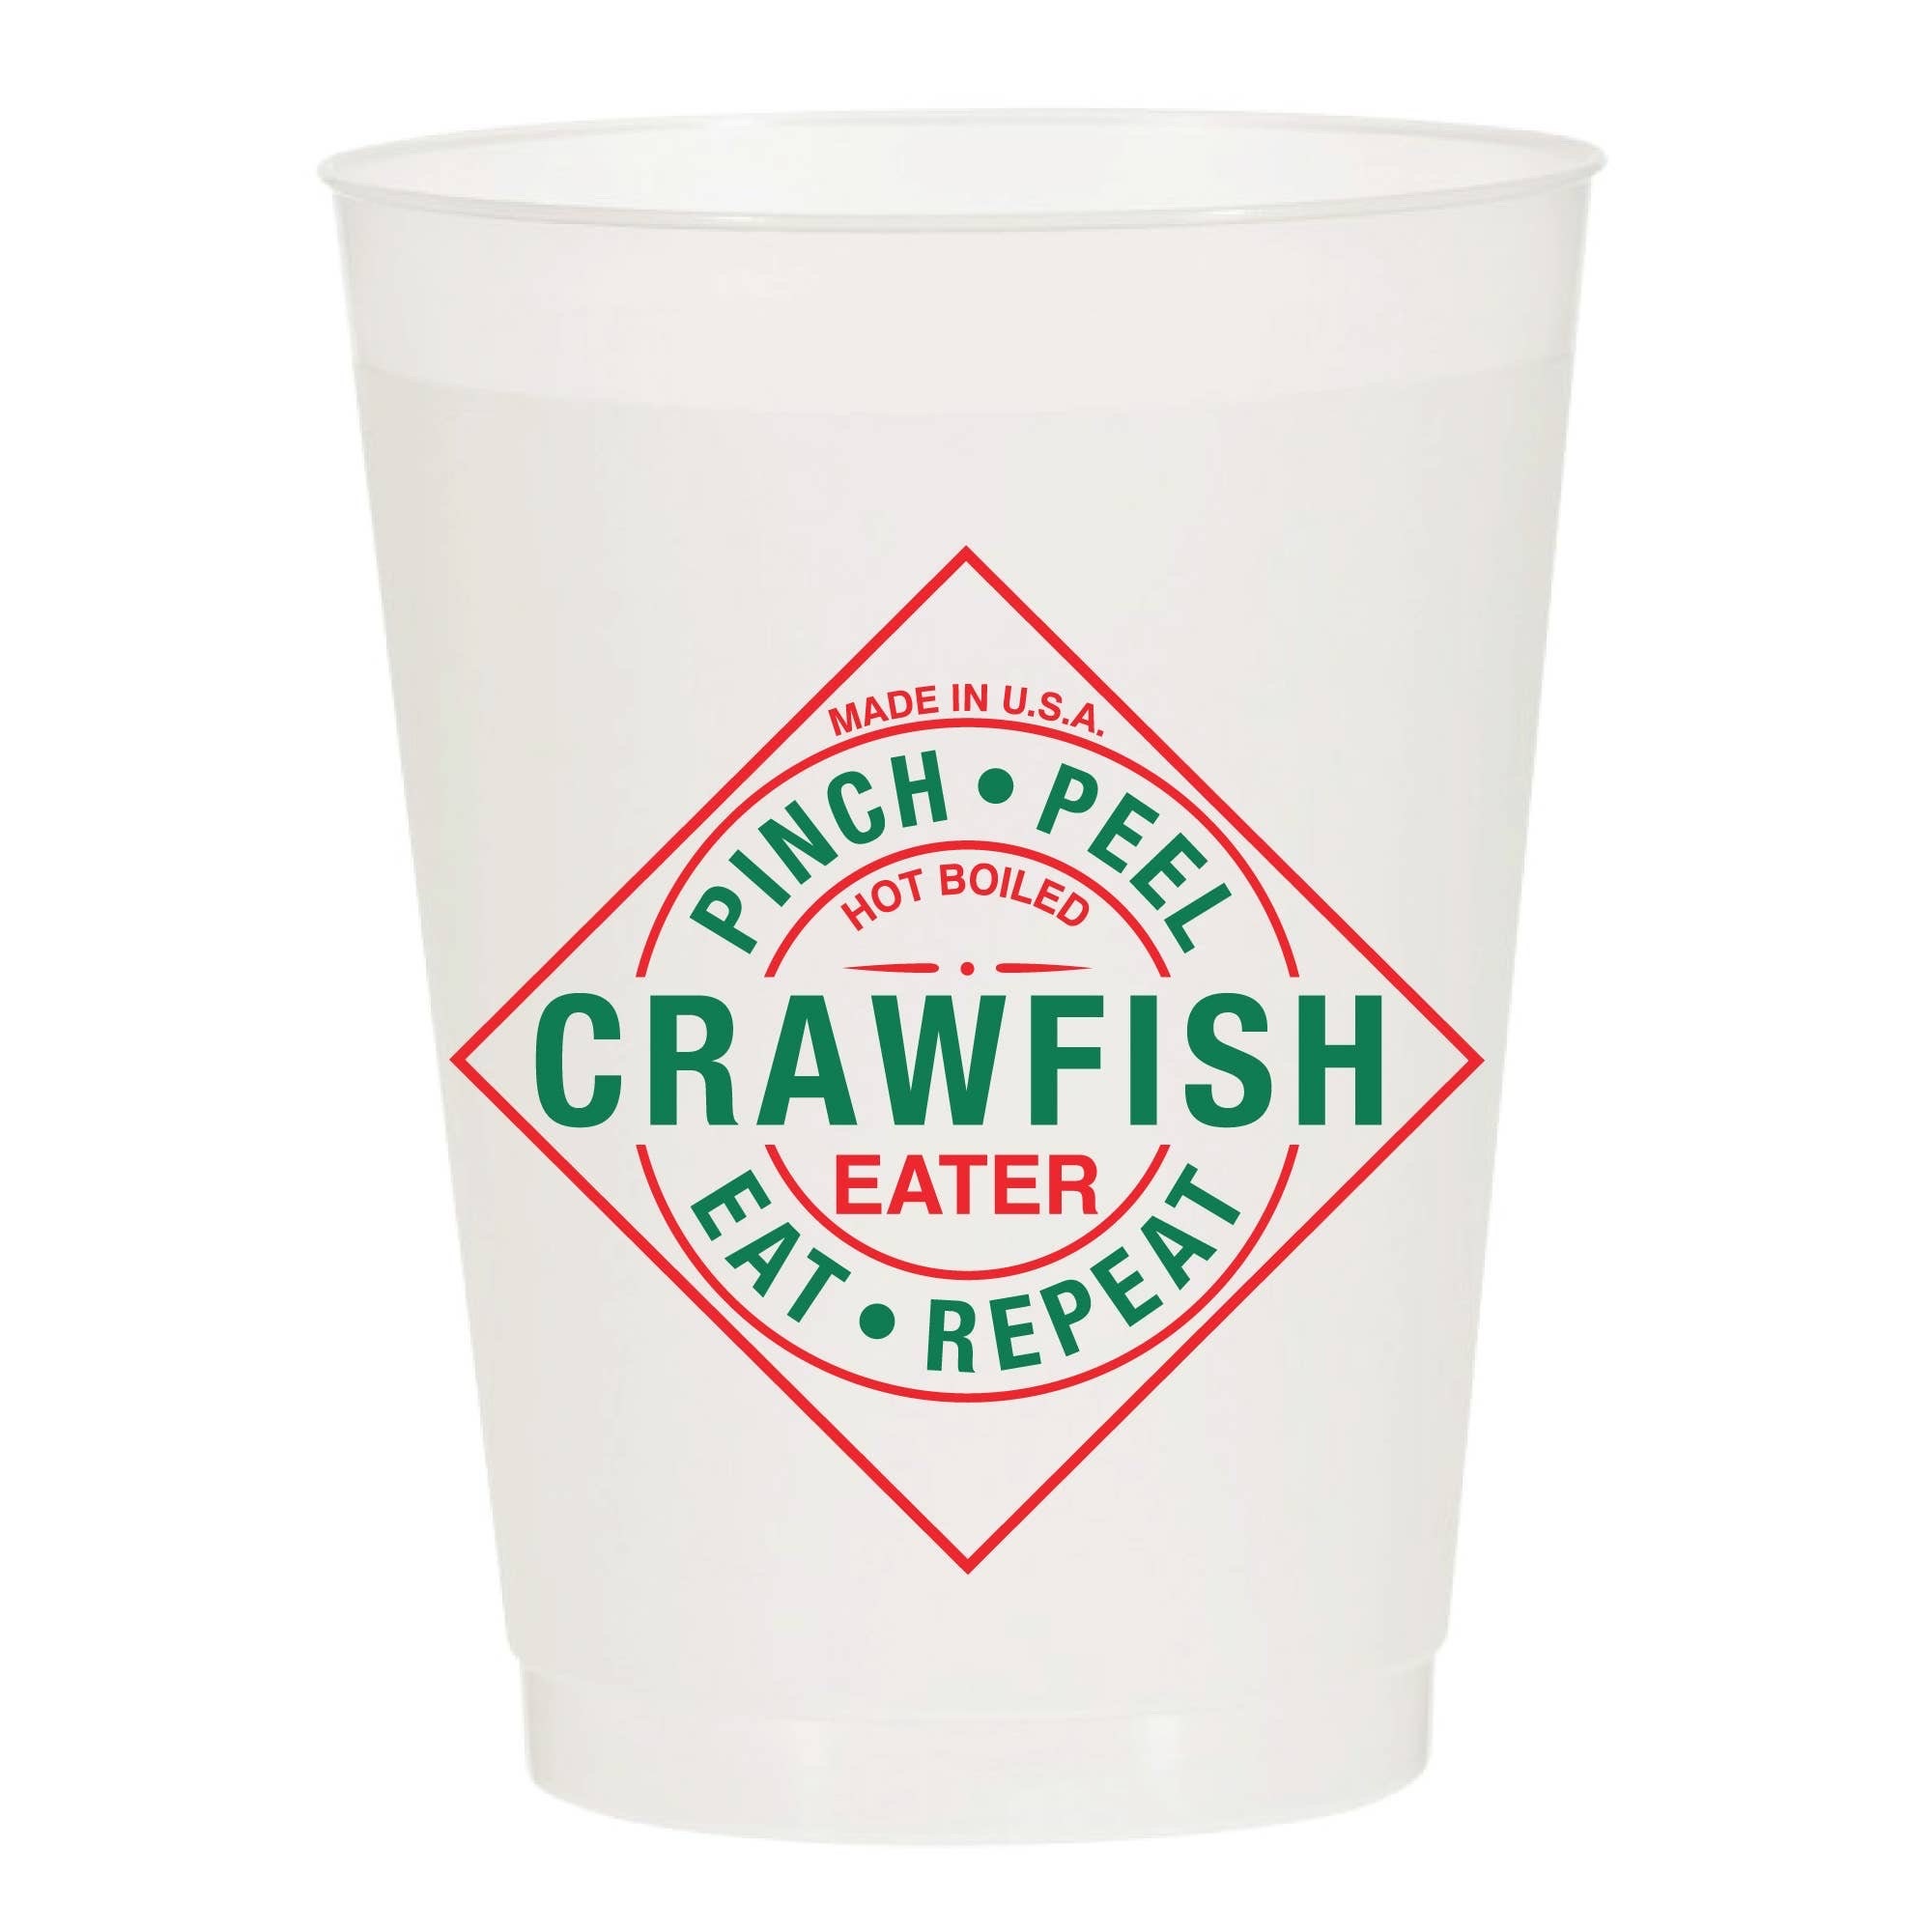 THE MARDI GRAS KREWE Crawfish Boil Disposable Cups- 50 Pack | Clear Plastic  Cups 16 Oz | Perfect Cups for Seafood, Crab, Crawfish Boil Party Supplies